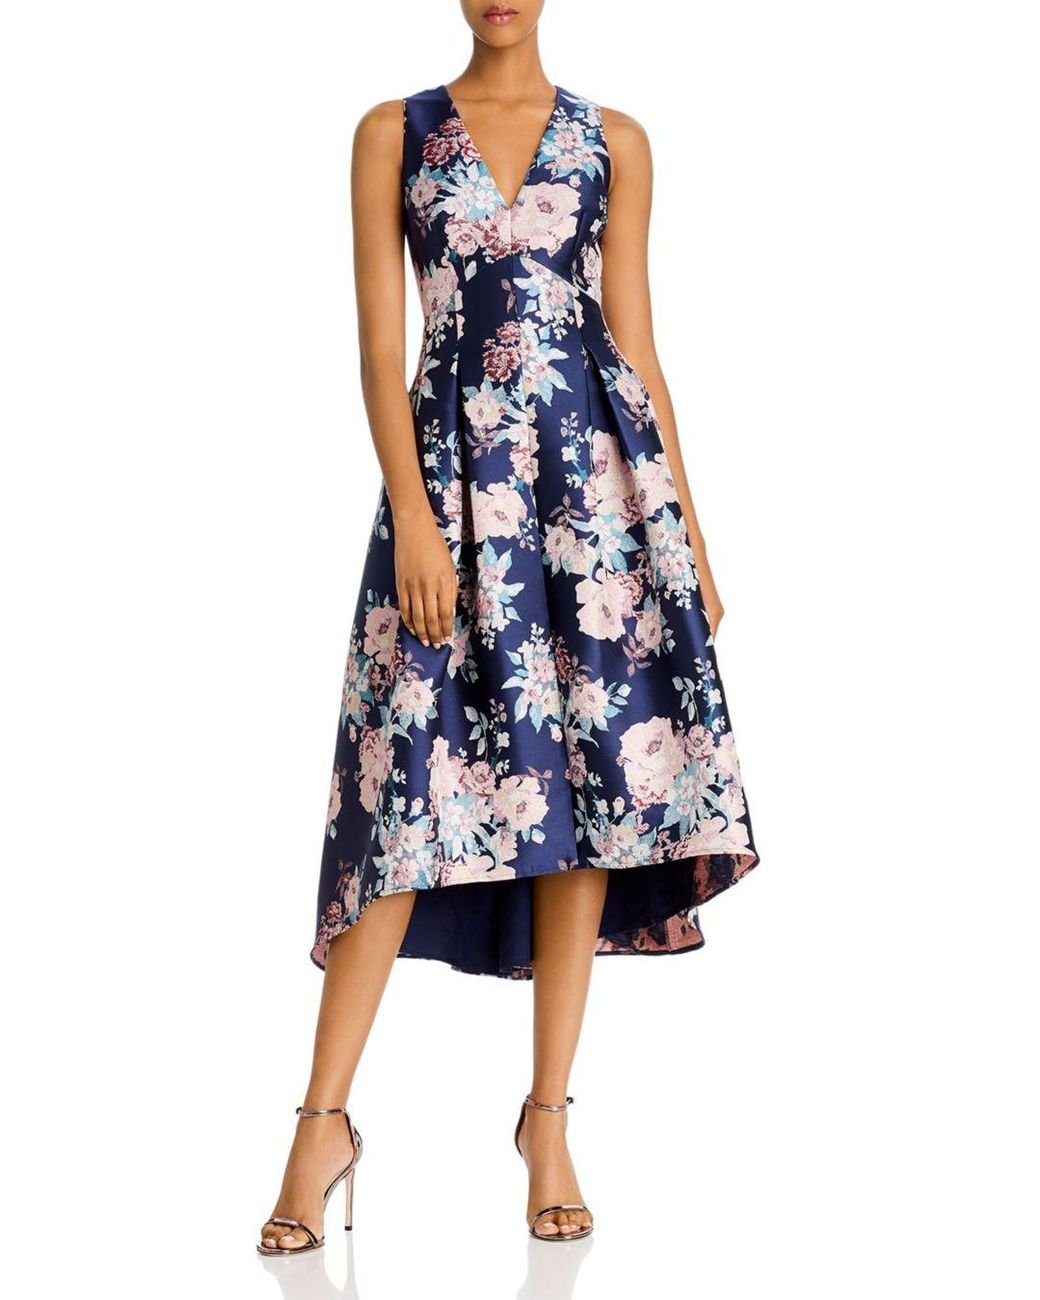 Eliza J Synthetic Floral Jacquard High/low Dress in Navy (Blue) - Lyst